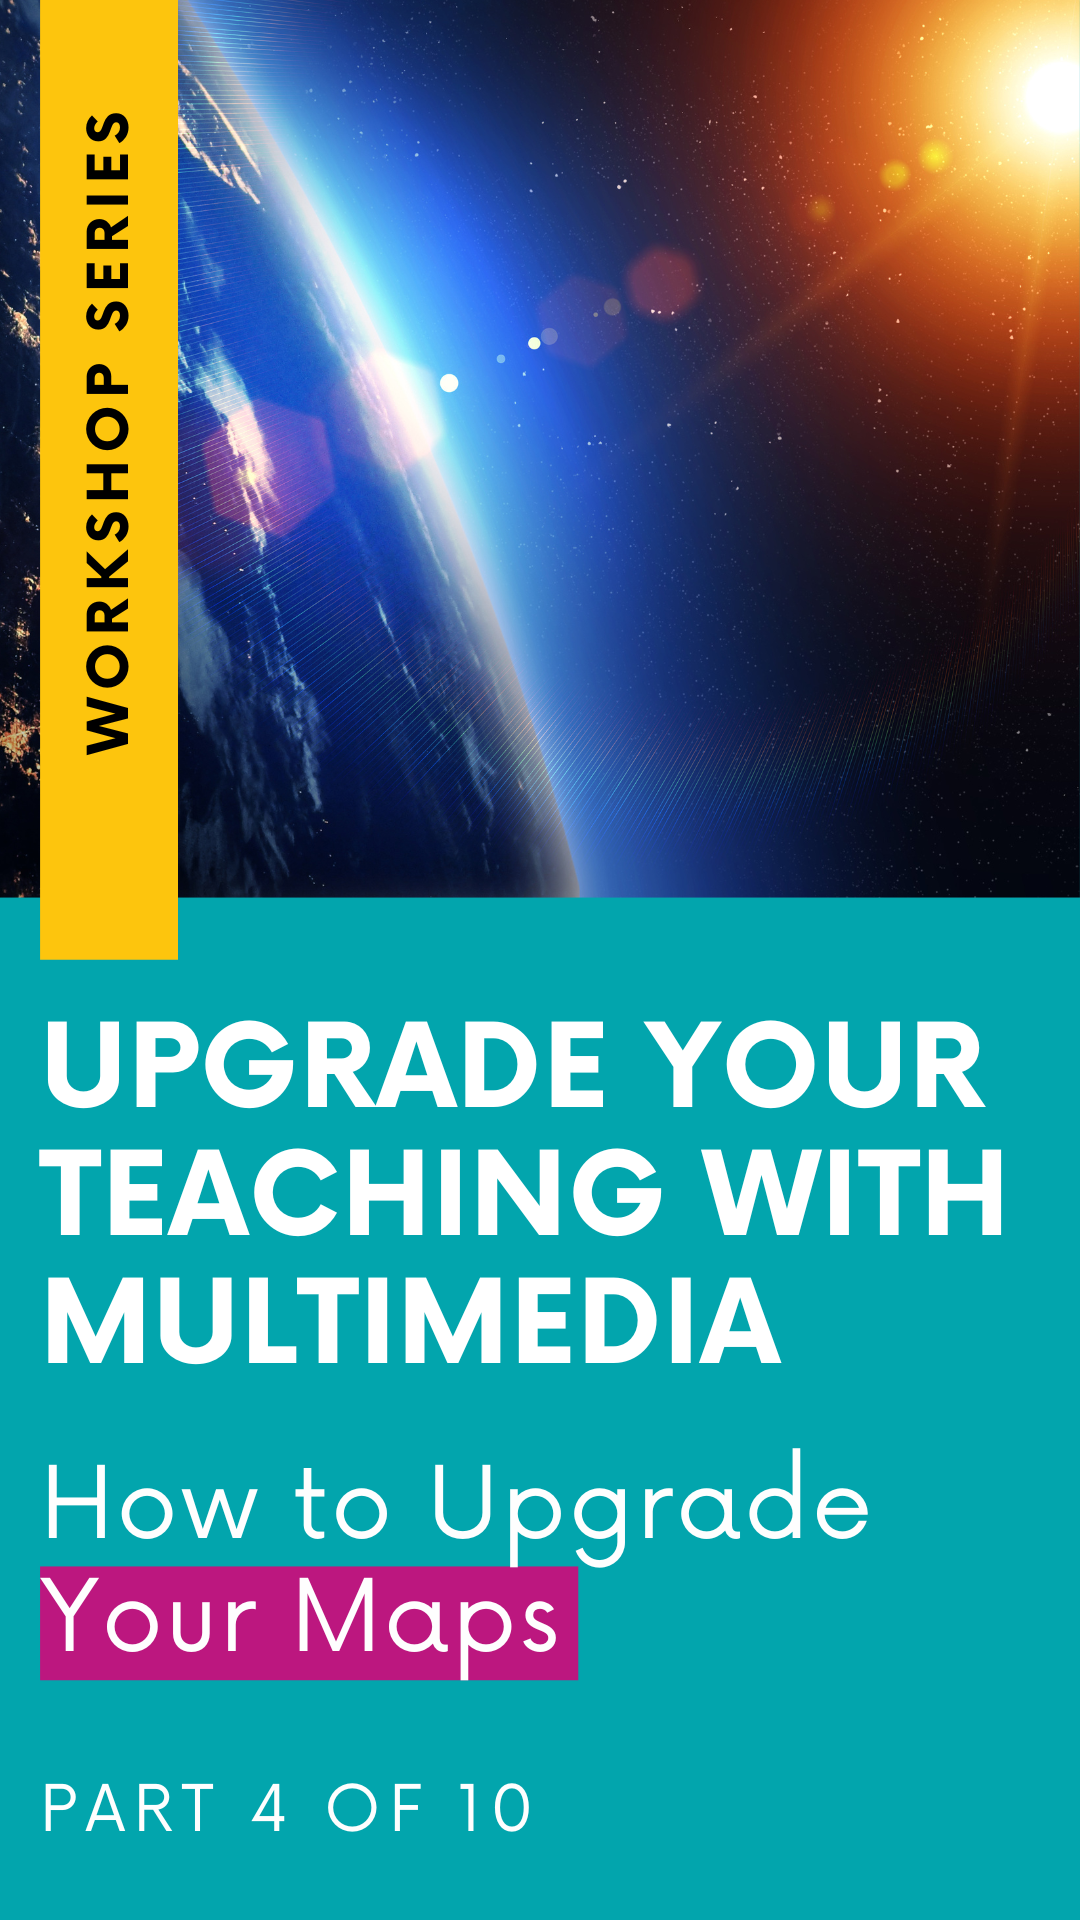 Upgrade Your Maps! (From the Upgrade Your Teaching with Multimedia Workshop Series: Part 4) (Copy)